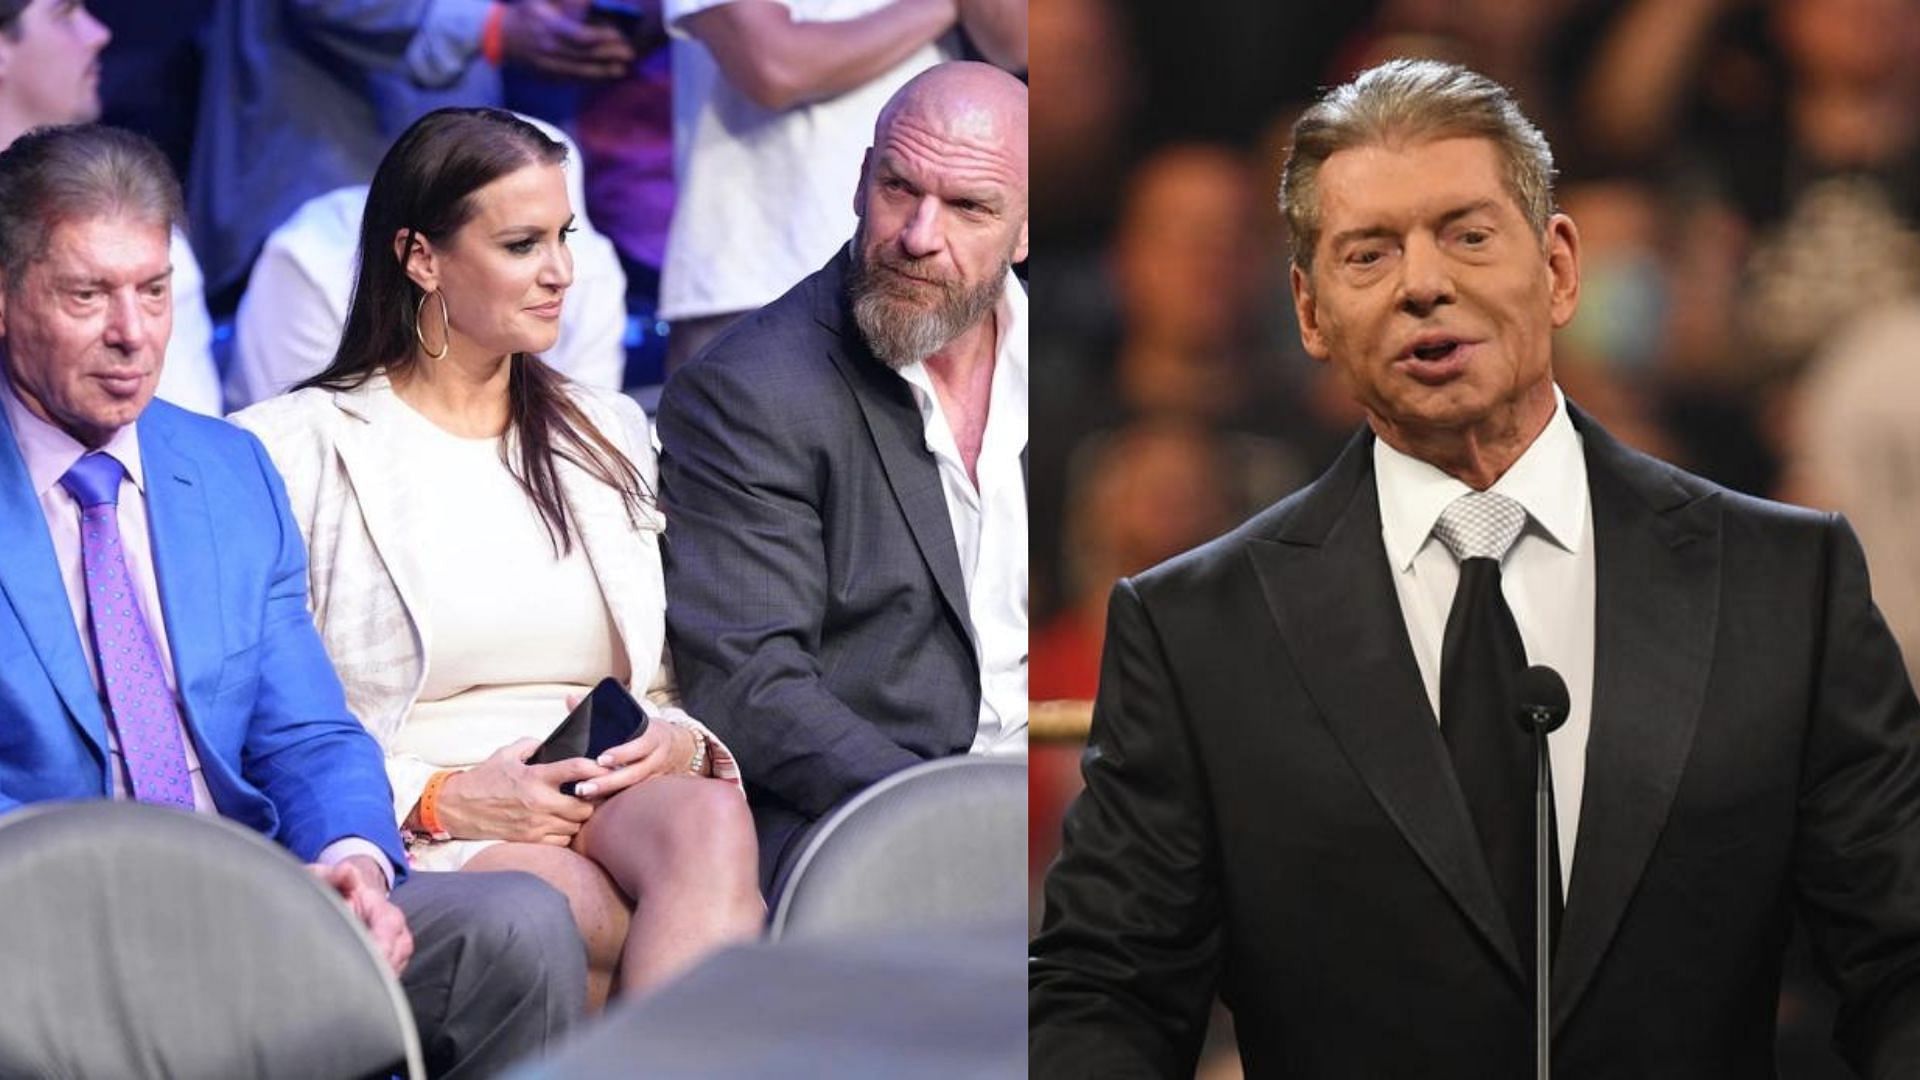 WWE Board of Directors saw people removed after Vince McMahon